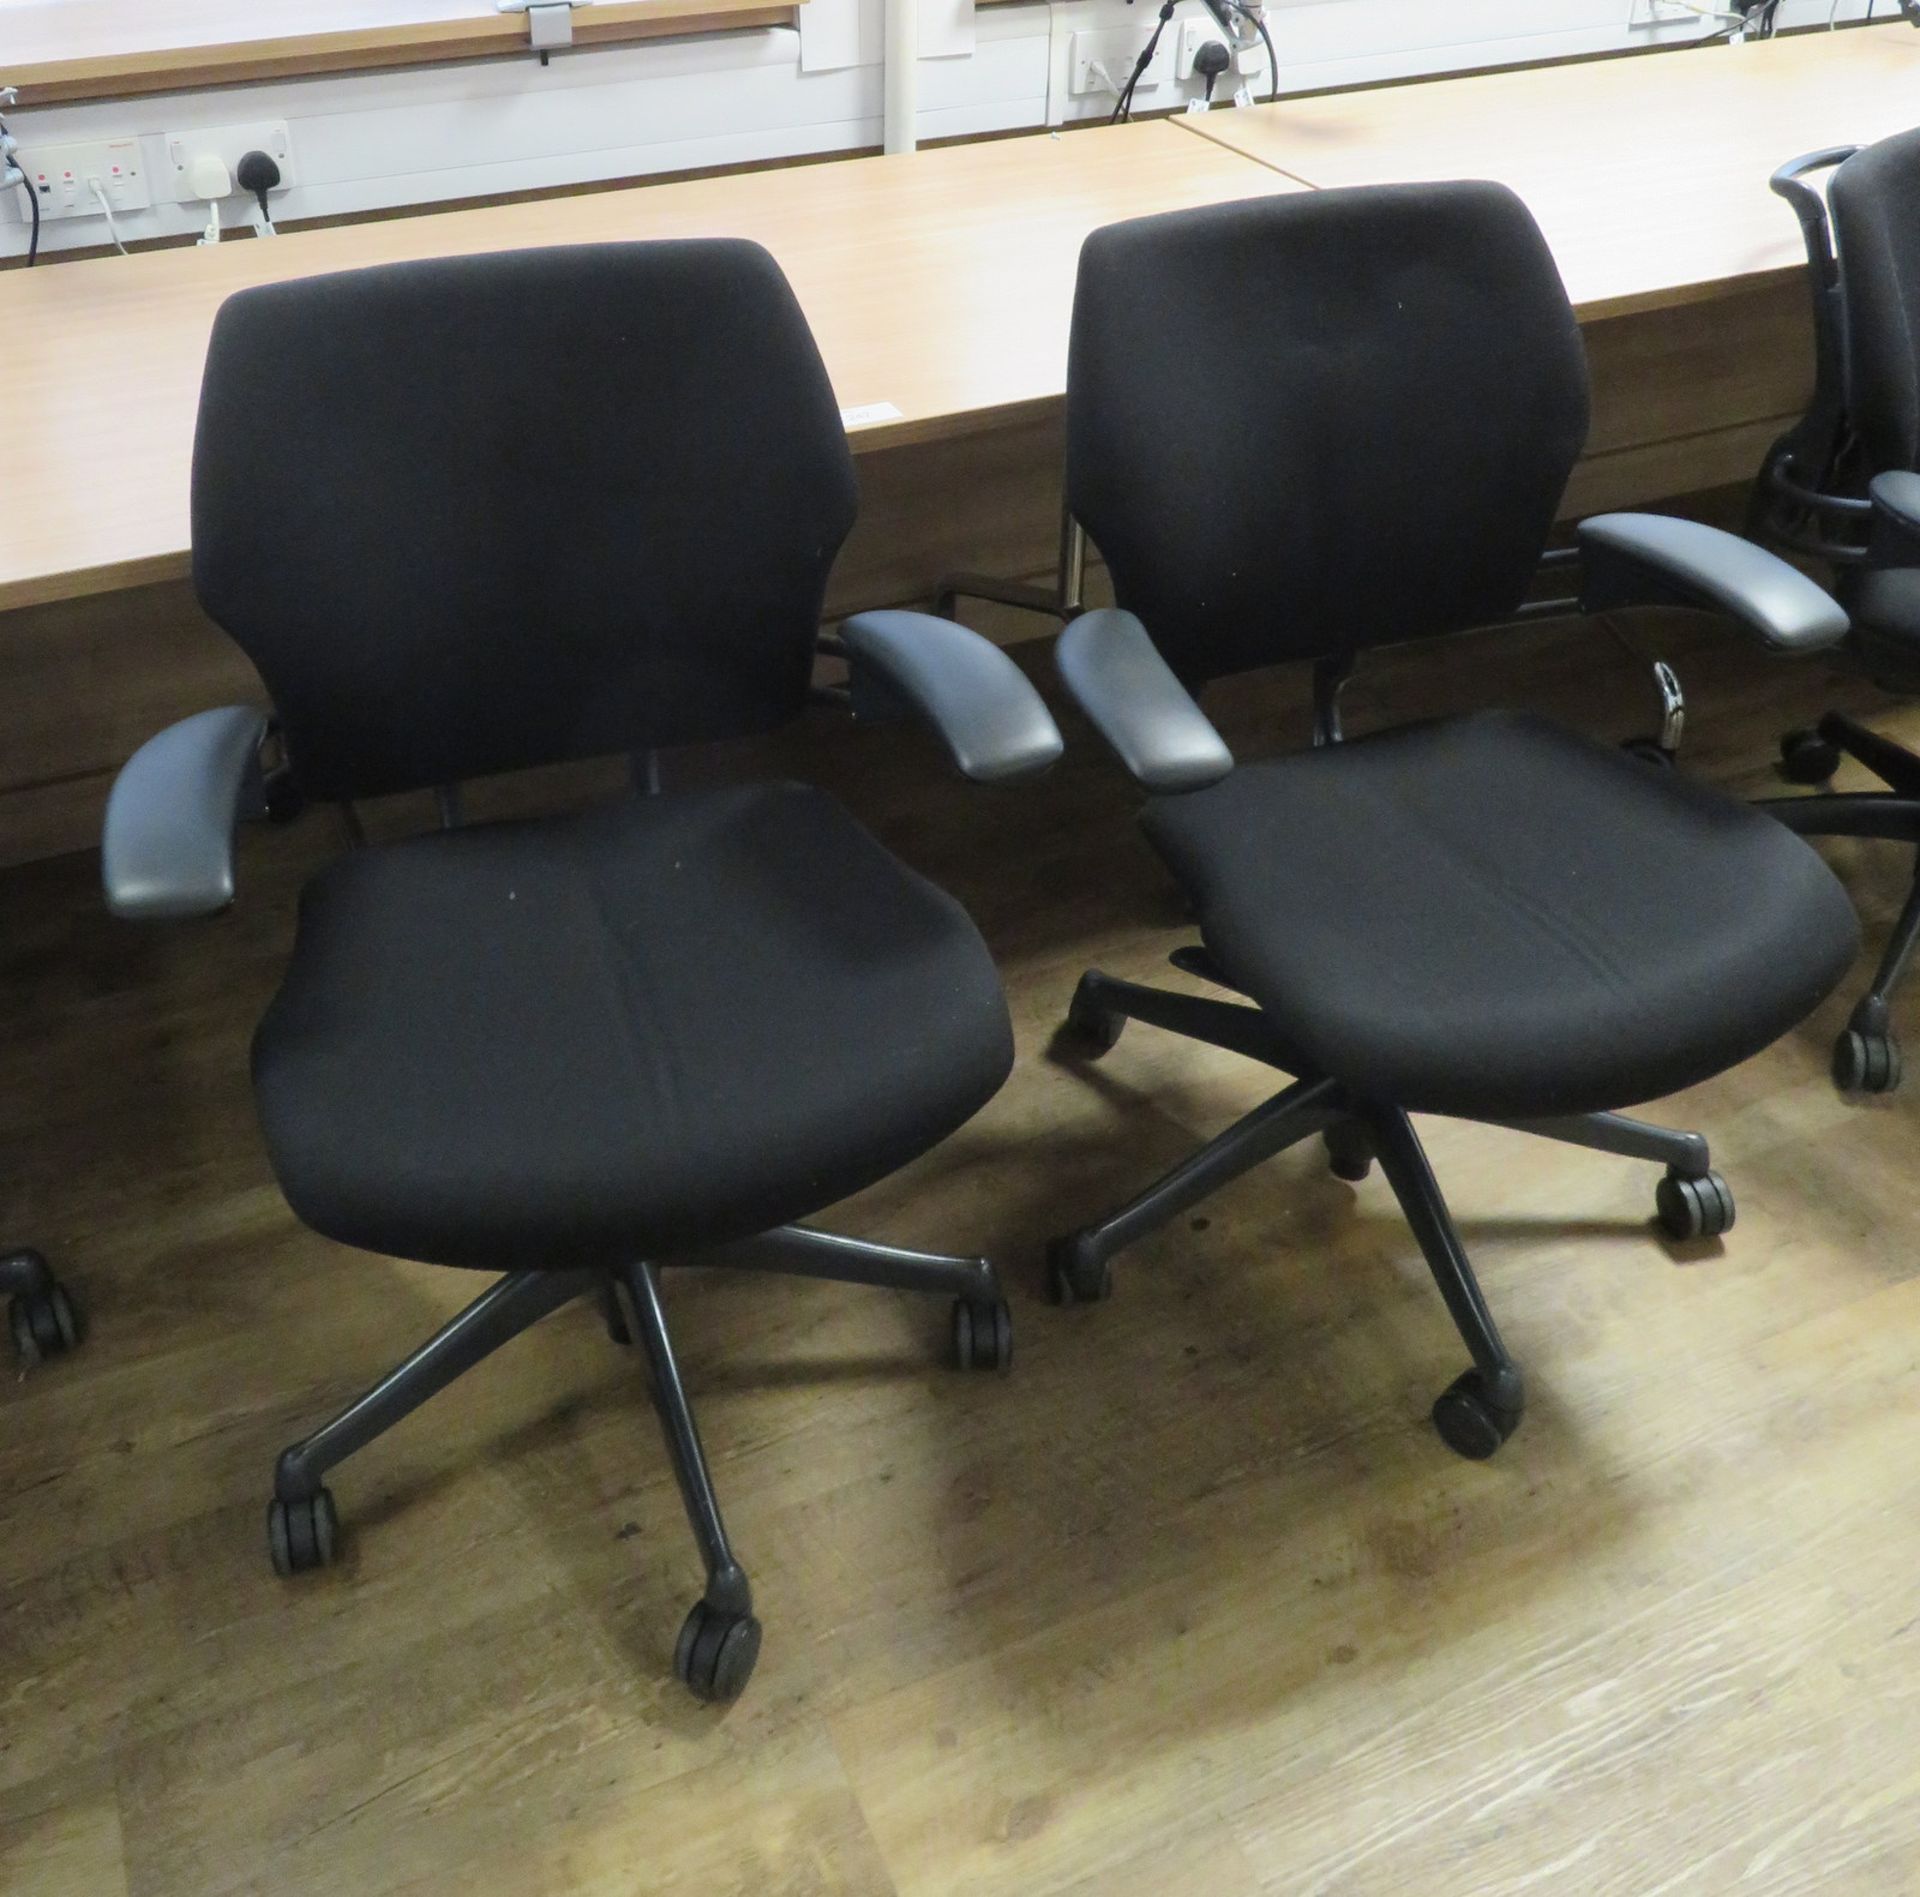 Tiltable Office Table & 2 Humanscale Freedom Office Chairs & Monitor Mounting Arms. - Image 2 of 2